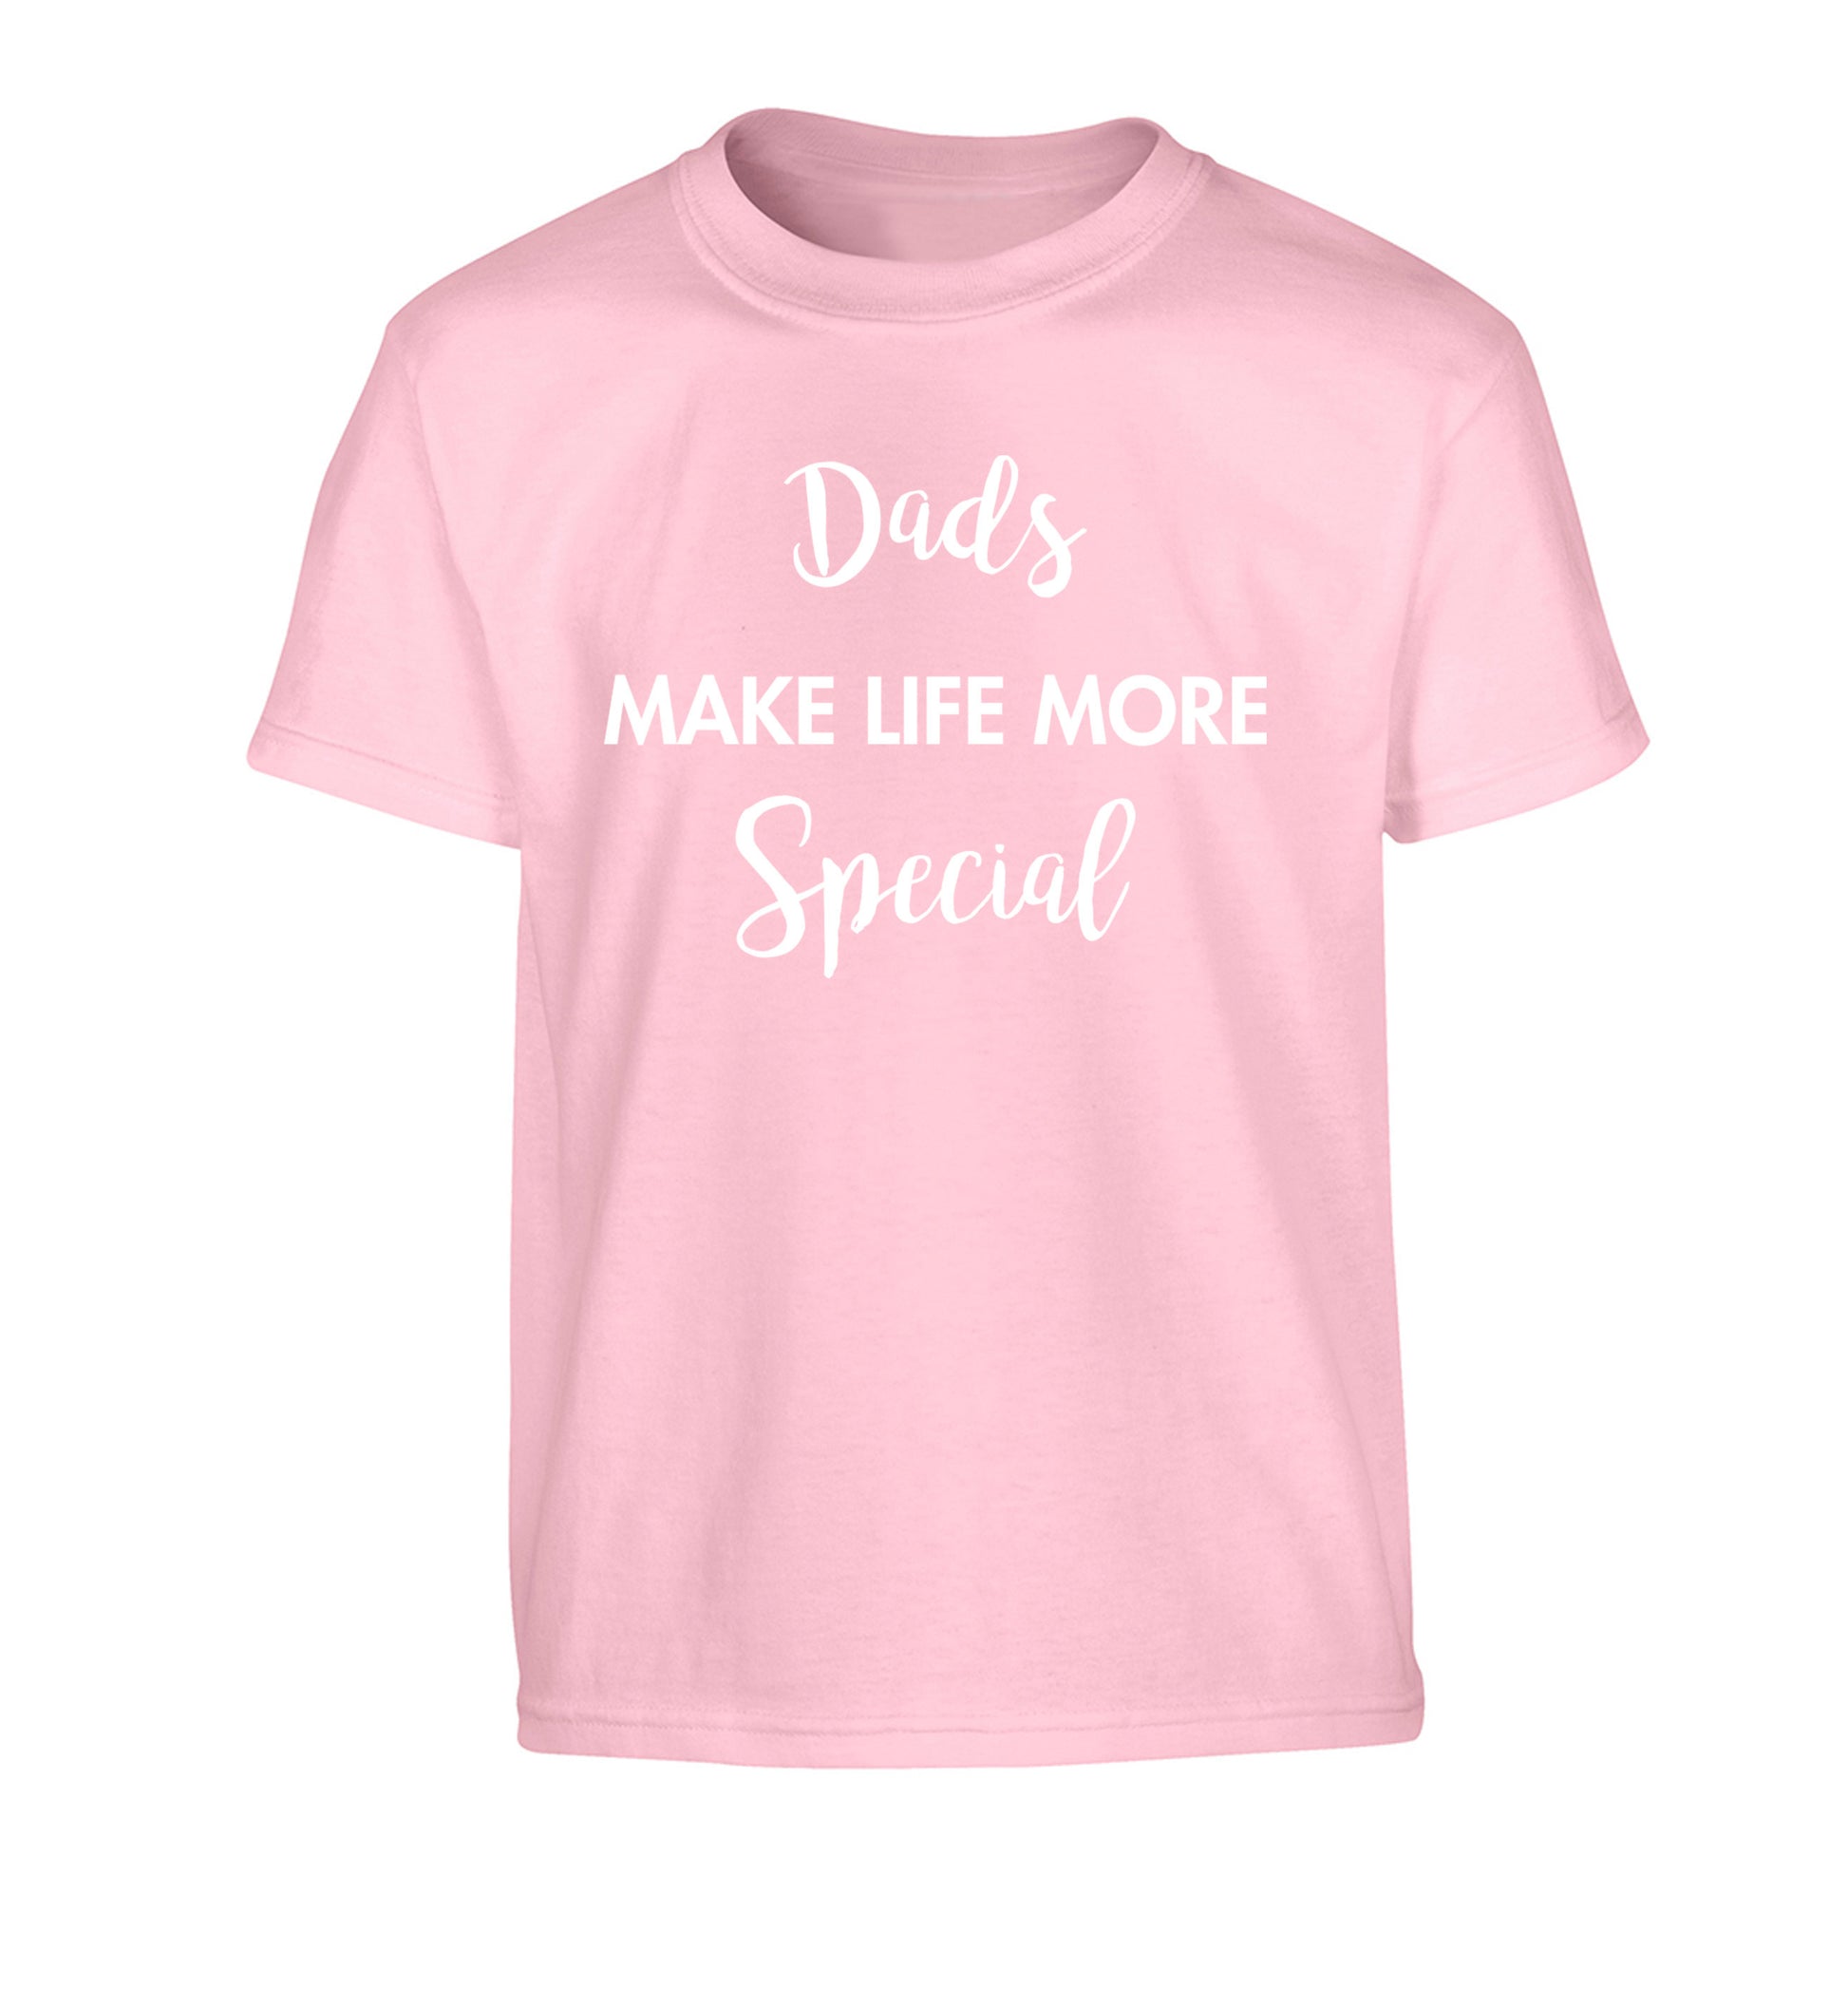 Dads make life more special Children's light pink Tshirt 12-14 Years